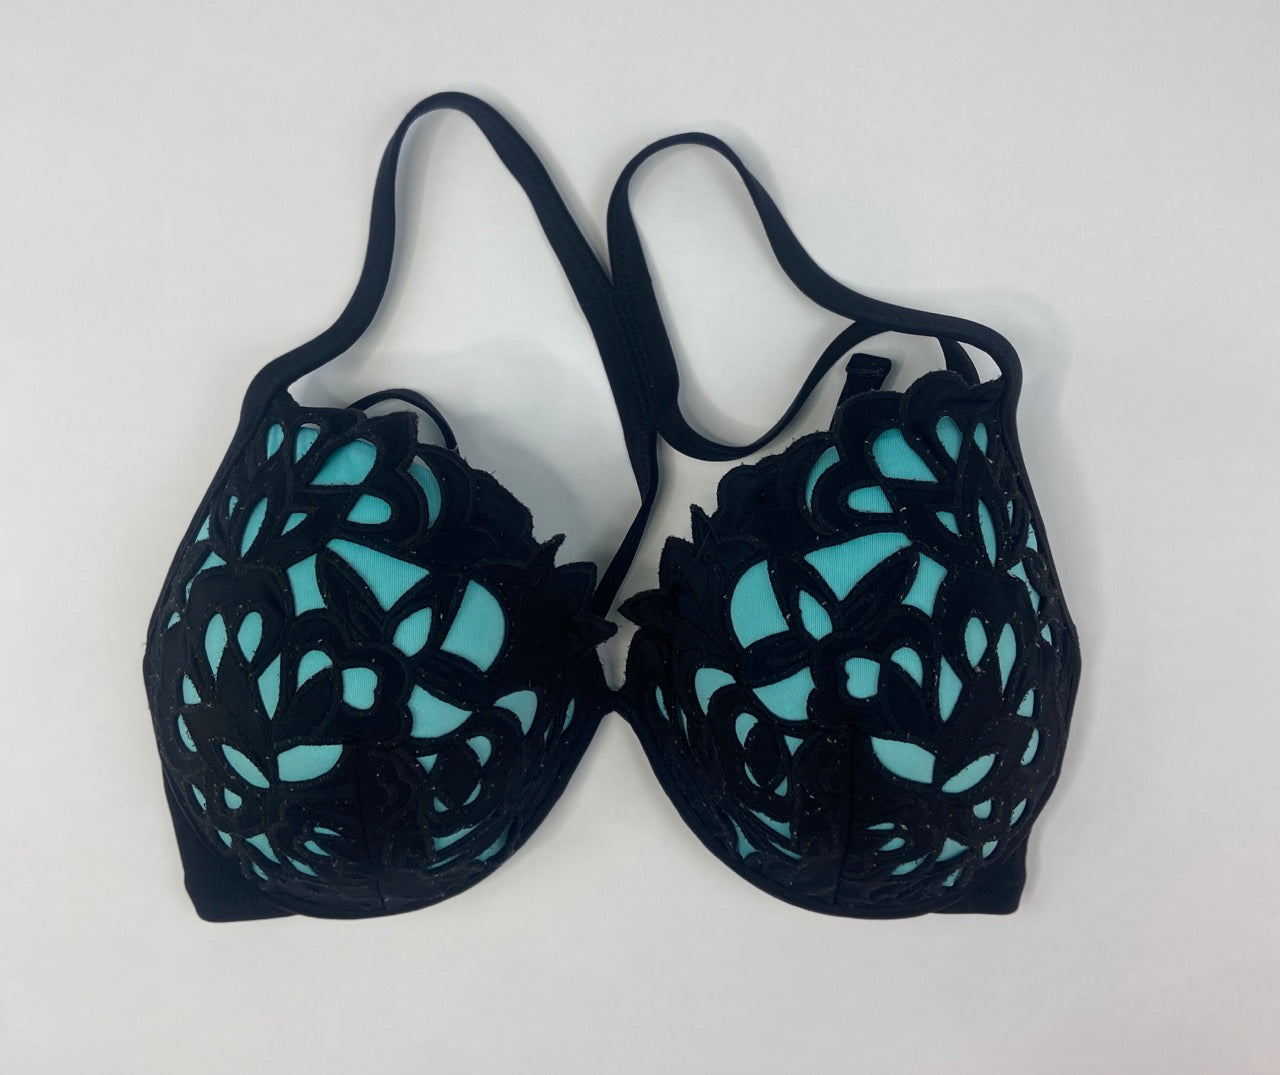 Shade & Shore Blue with Black Large Lace Swimsuit Top- 38D